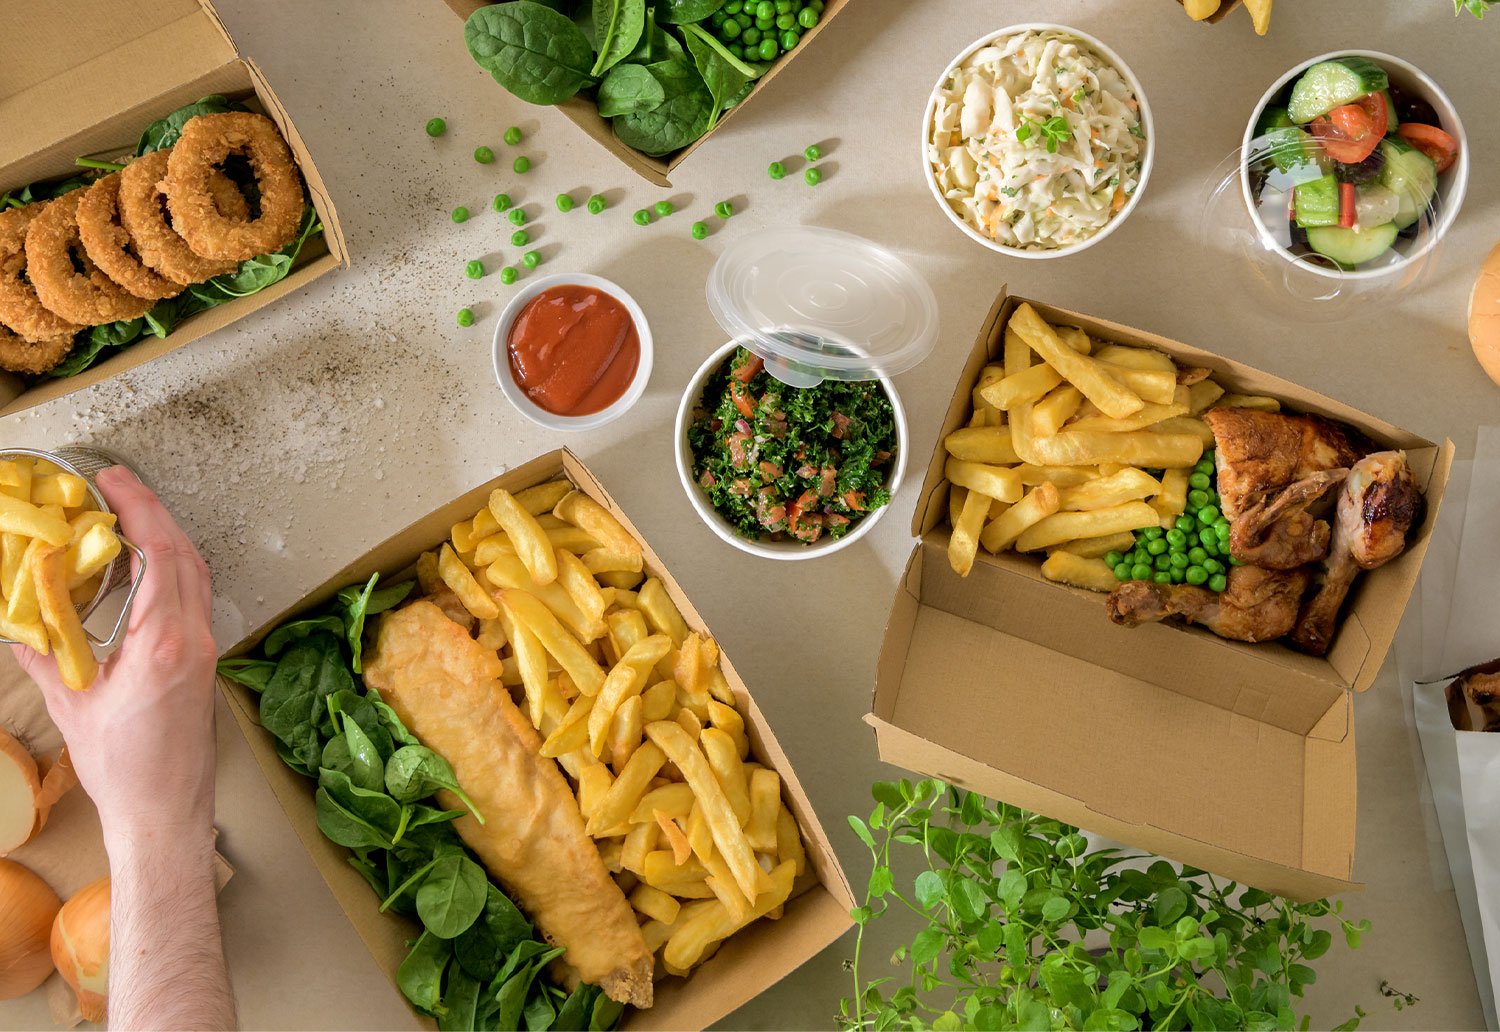 Images of takeaway packaging, with food efficiently packed inside